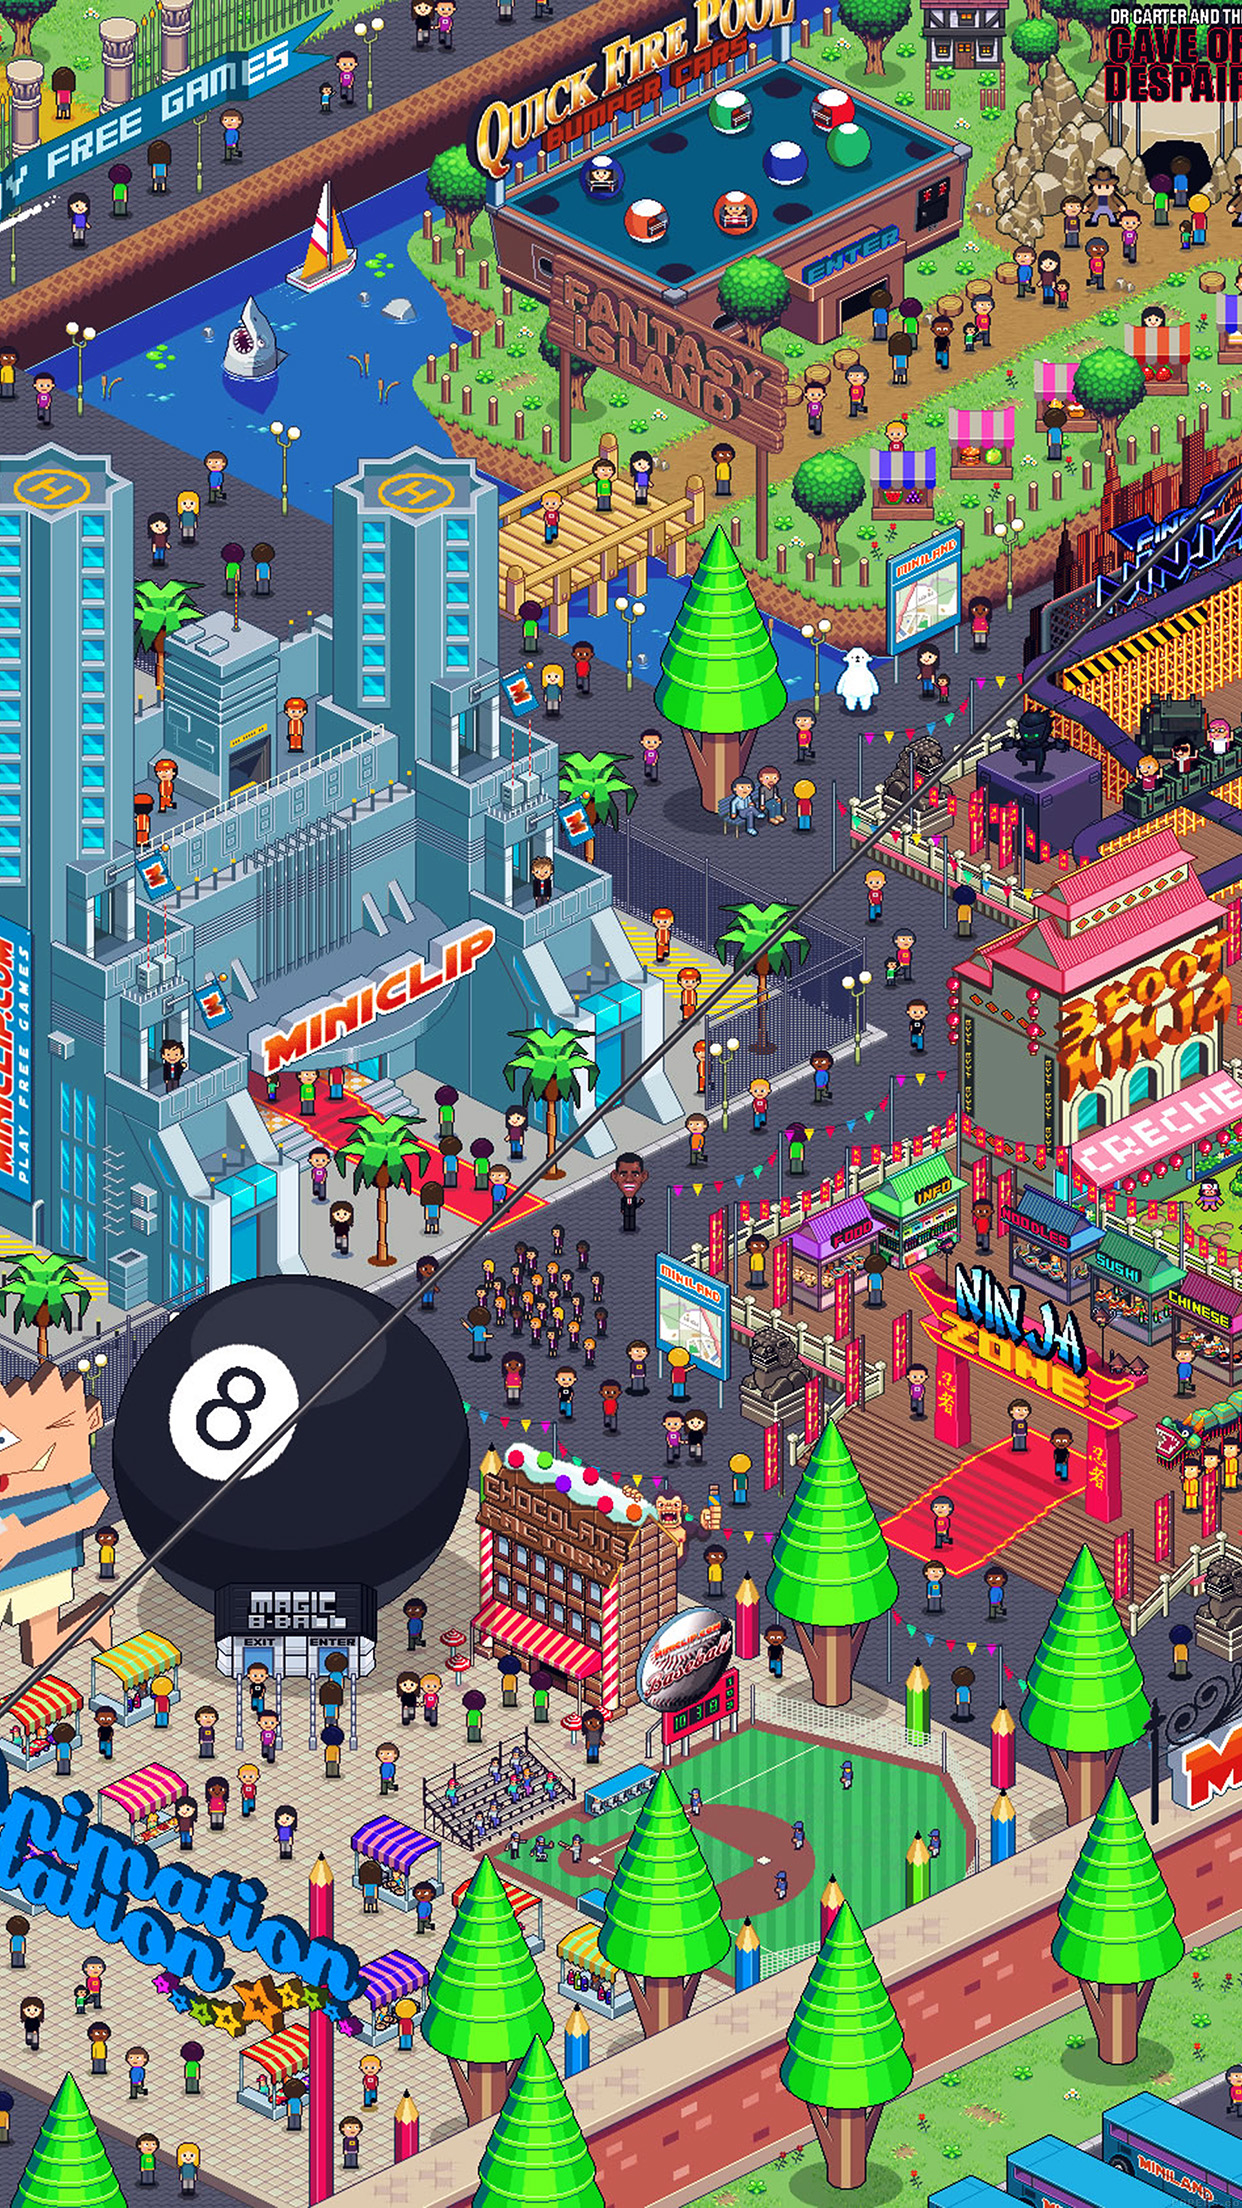 Pixel art city by army of trolls Download Free Wallpaper for iPhone 6s, 7s